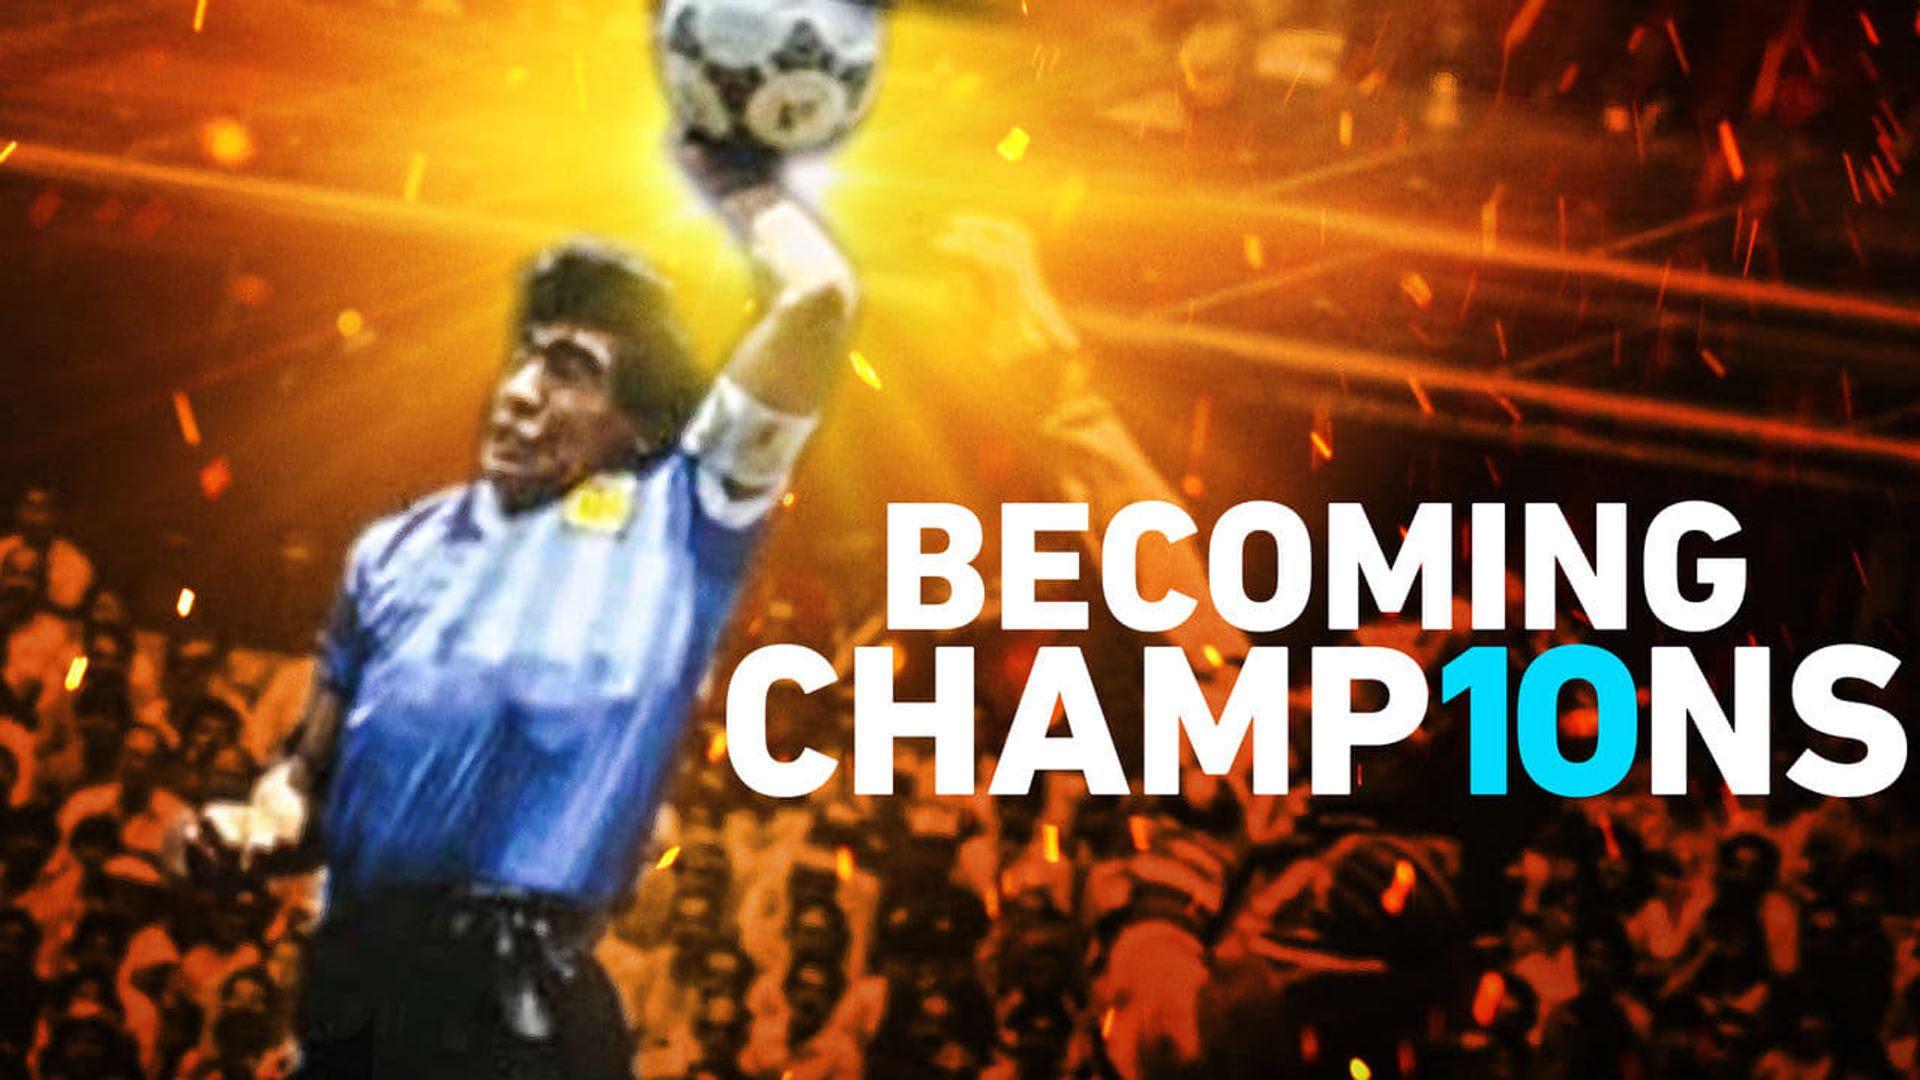 Becoming Champions background